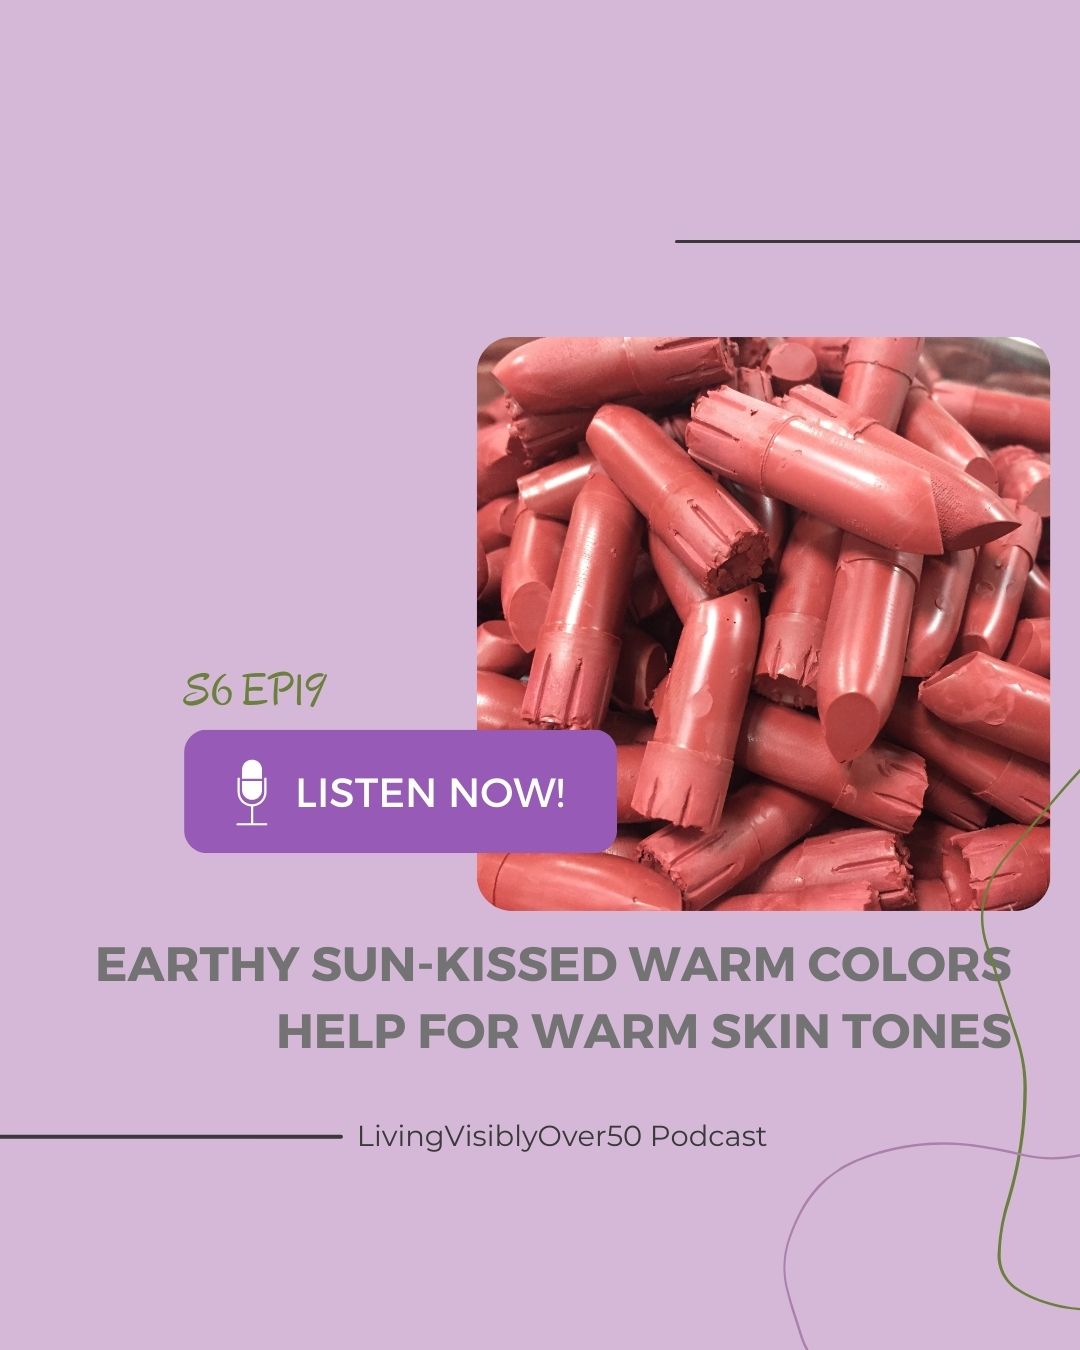 living visibly over 50 podcast beauty and style